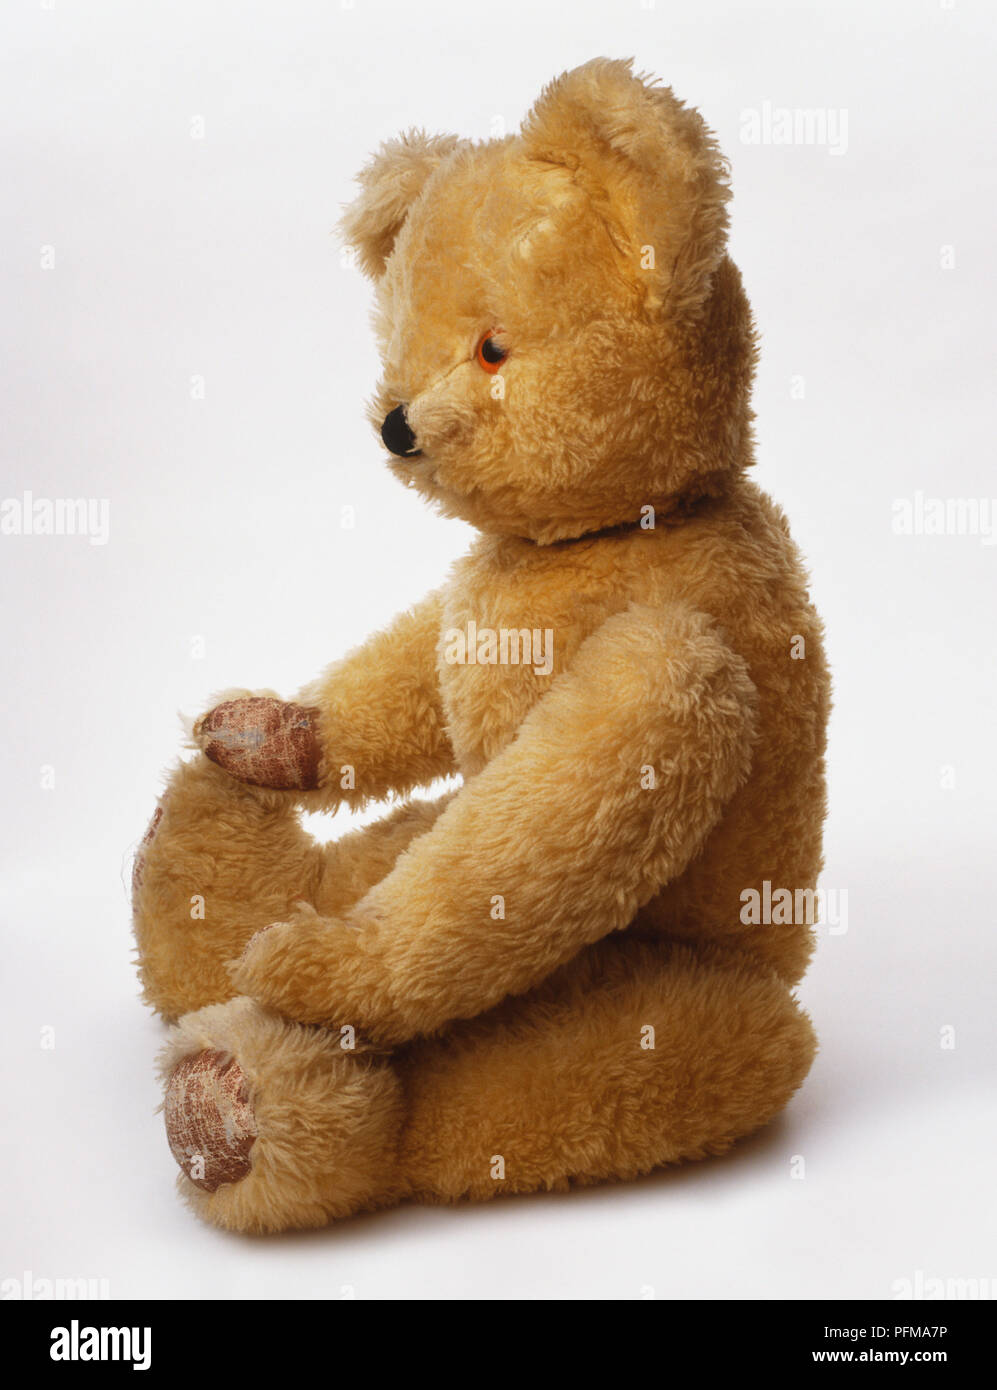 Chad Valley: 1960-78: Sitting 1960 teddy bear, side view Stock Photo - Alamy